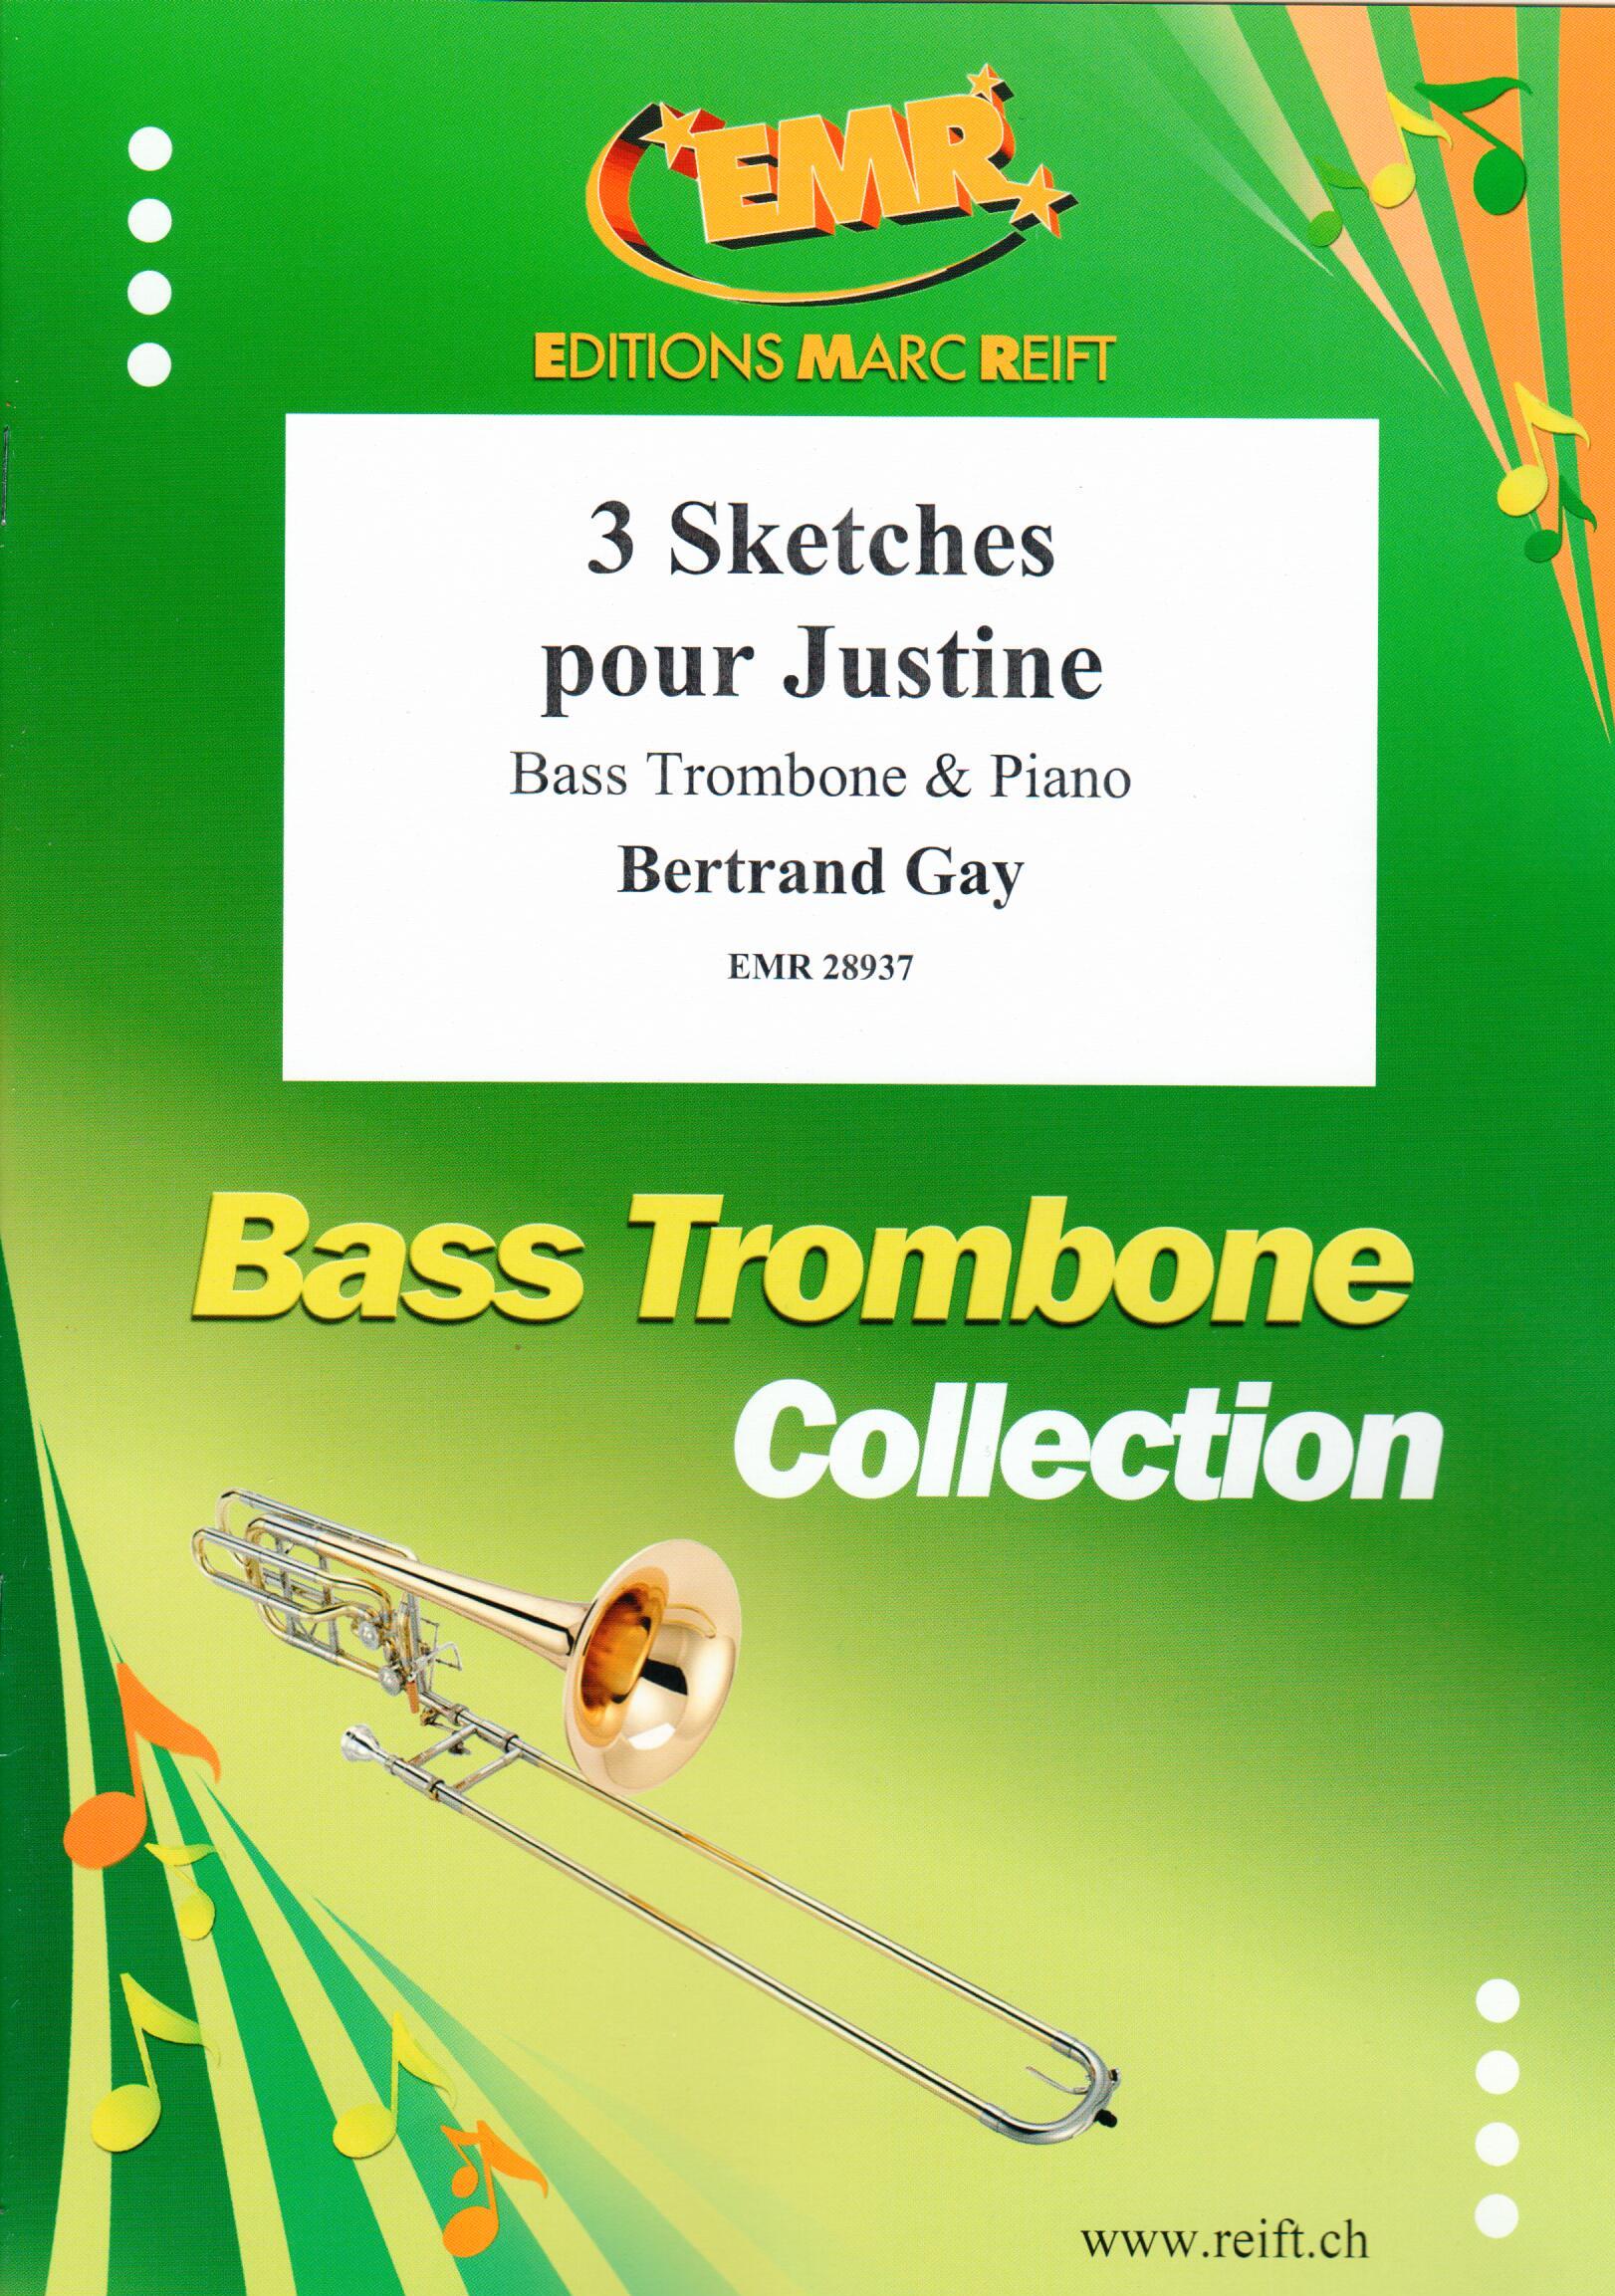 3 SKETCHES POUR JUSTINE, EMR Bass Trombone